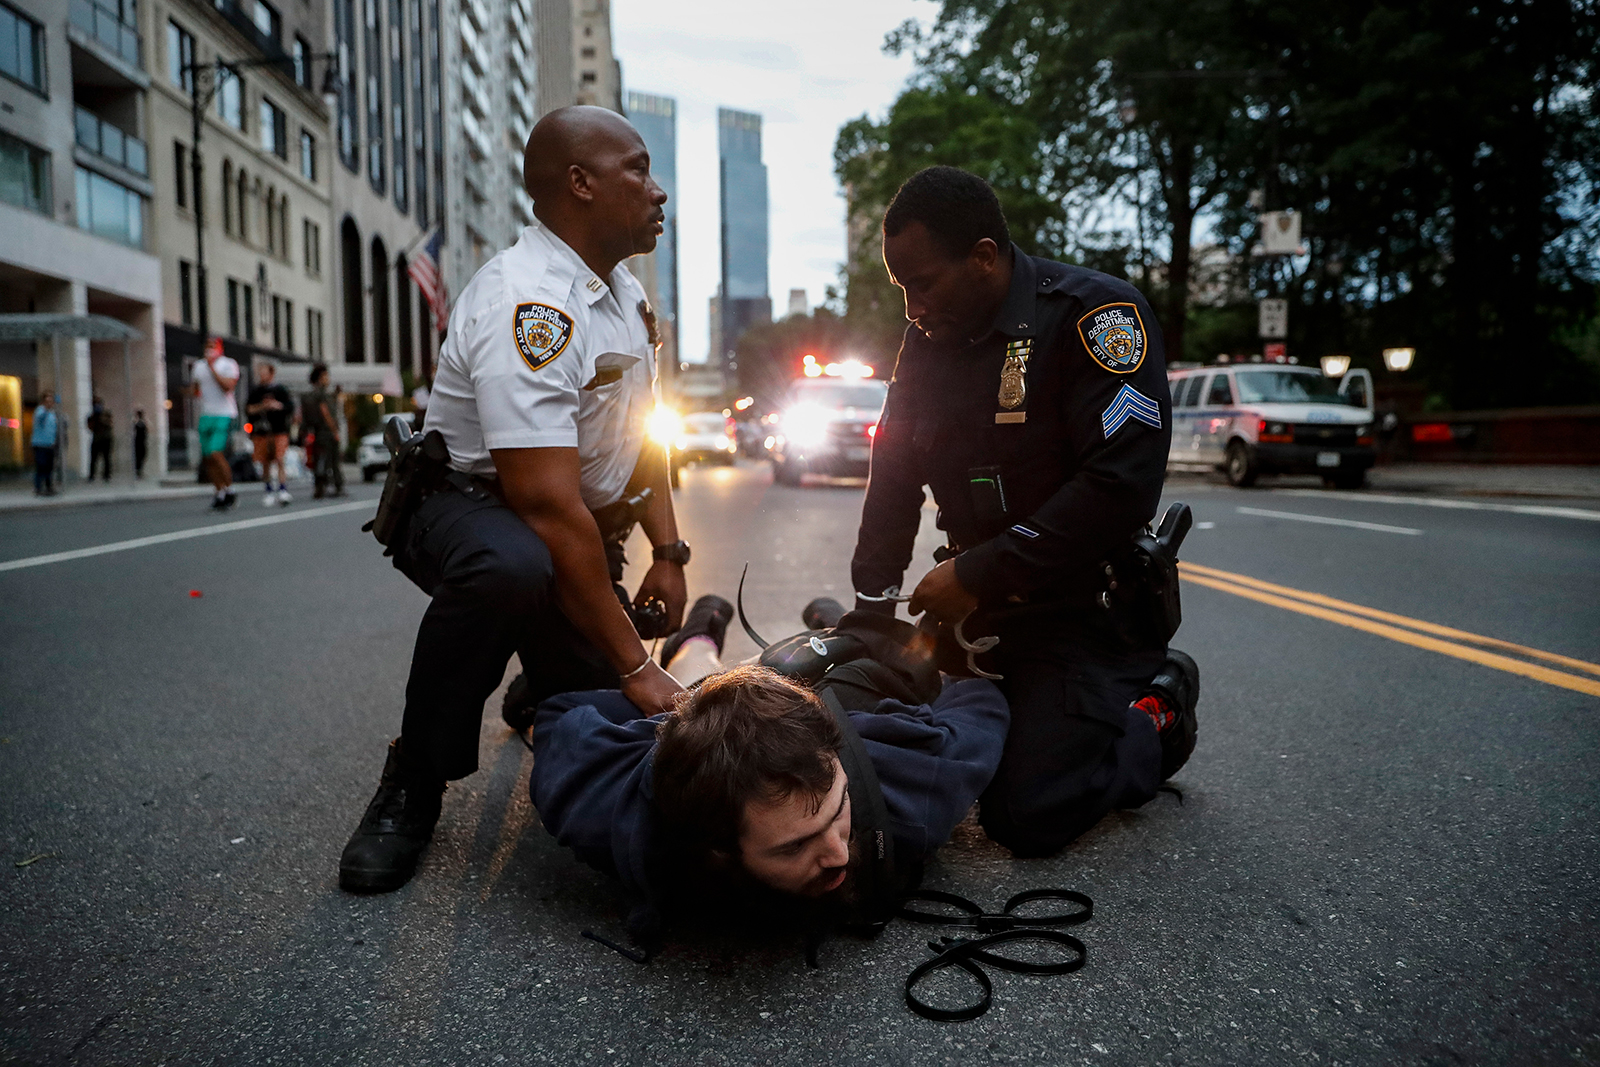 A protester is arrested for violating curfew near the Plaza Hotel on June 3, in the Manhattan borough of New York. 